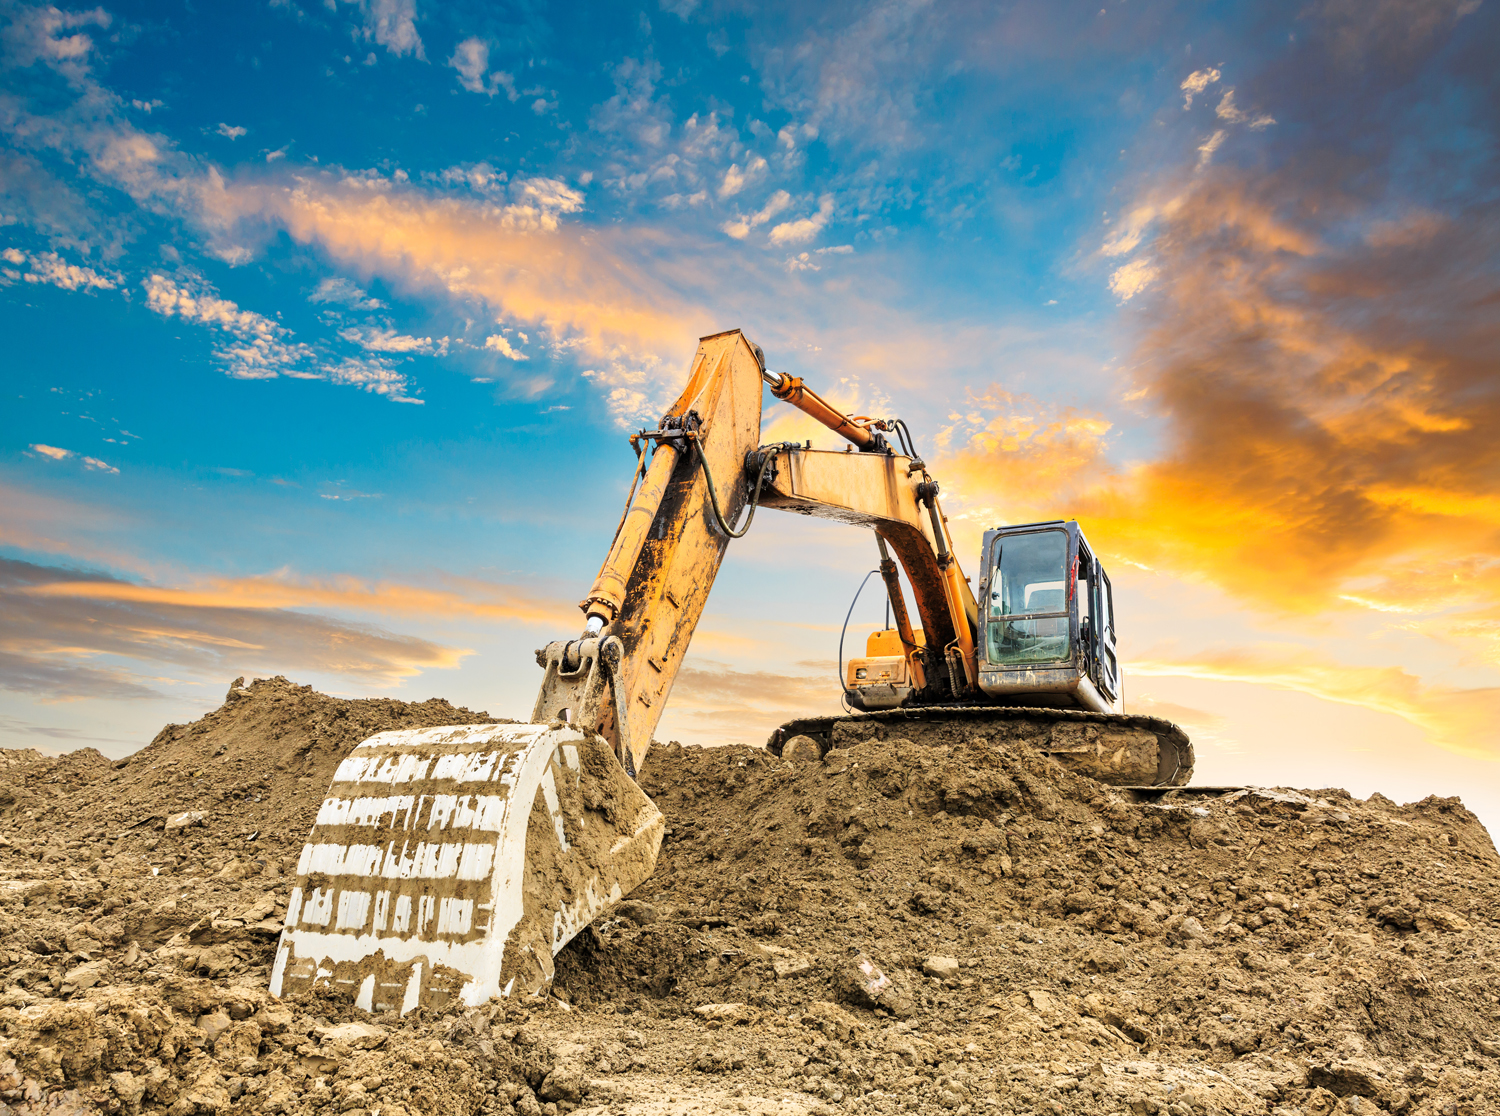 Typical applications for the LK couplings include excavators, vibratory rollers, loaders, cranes, passenger elevators, forklifts and tractors. (Image: Shutterstock/Zhao Jiankang)